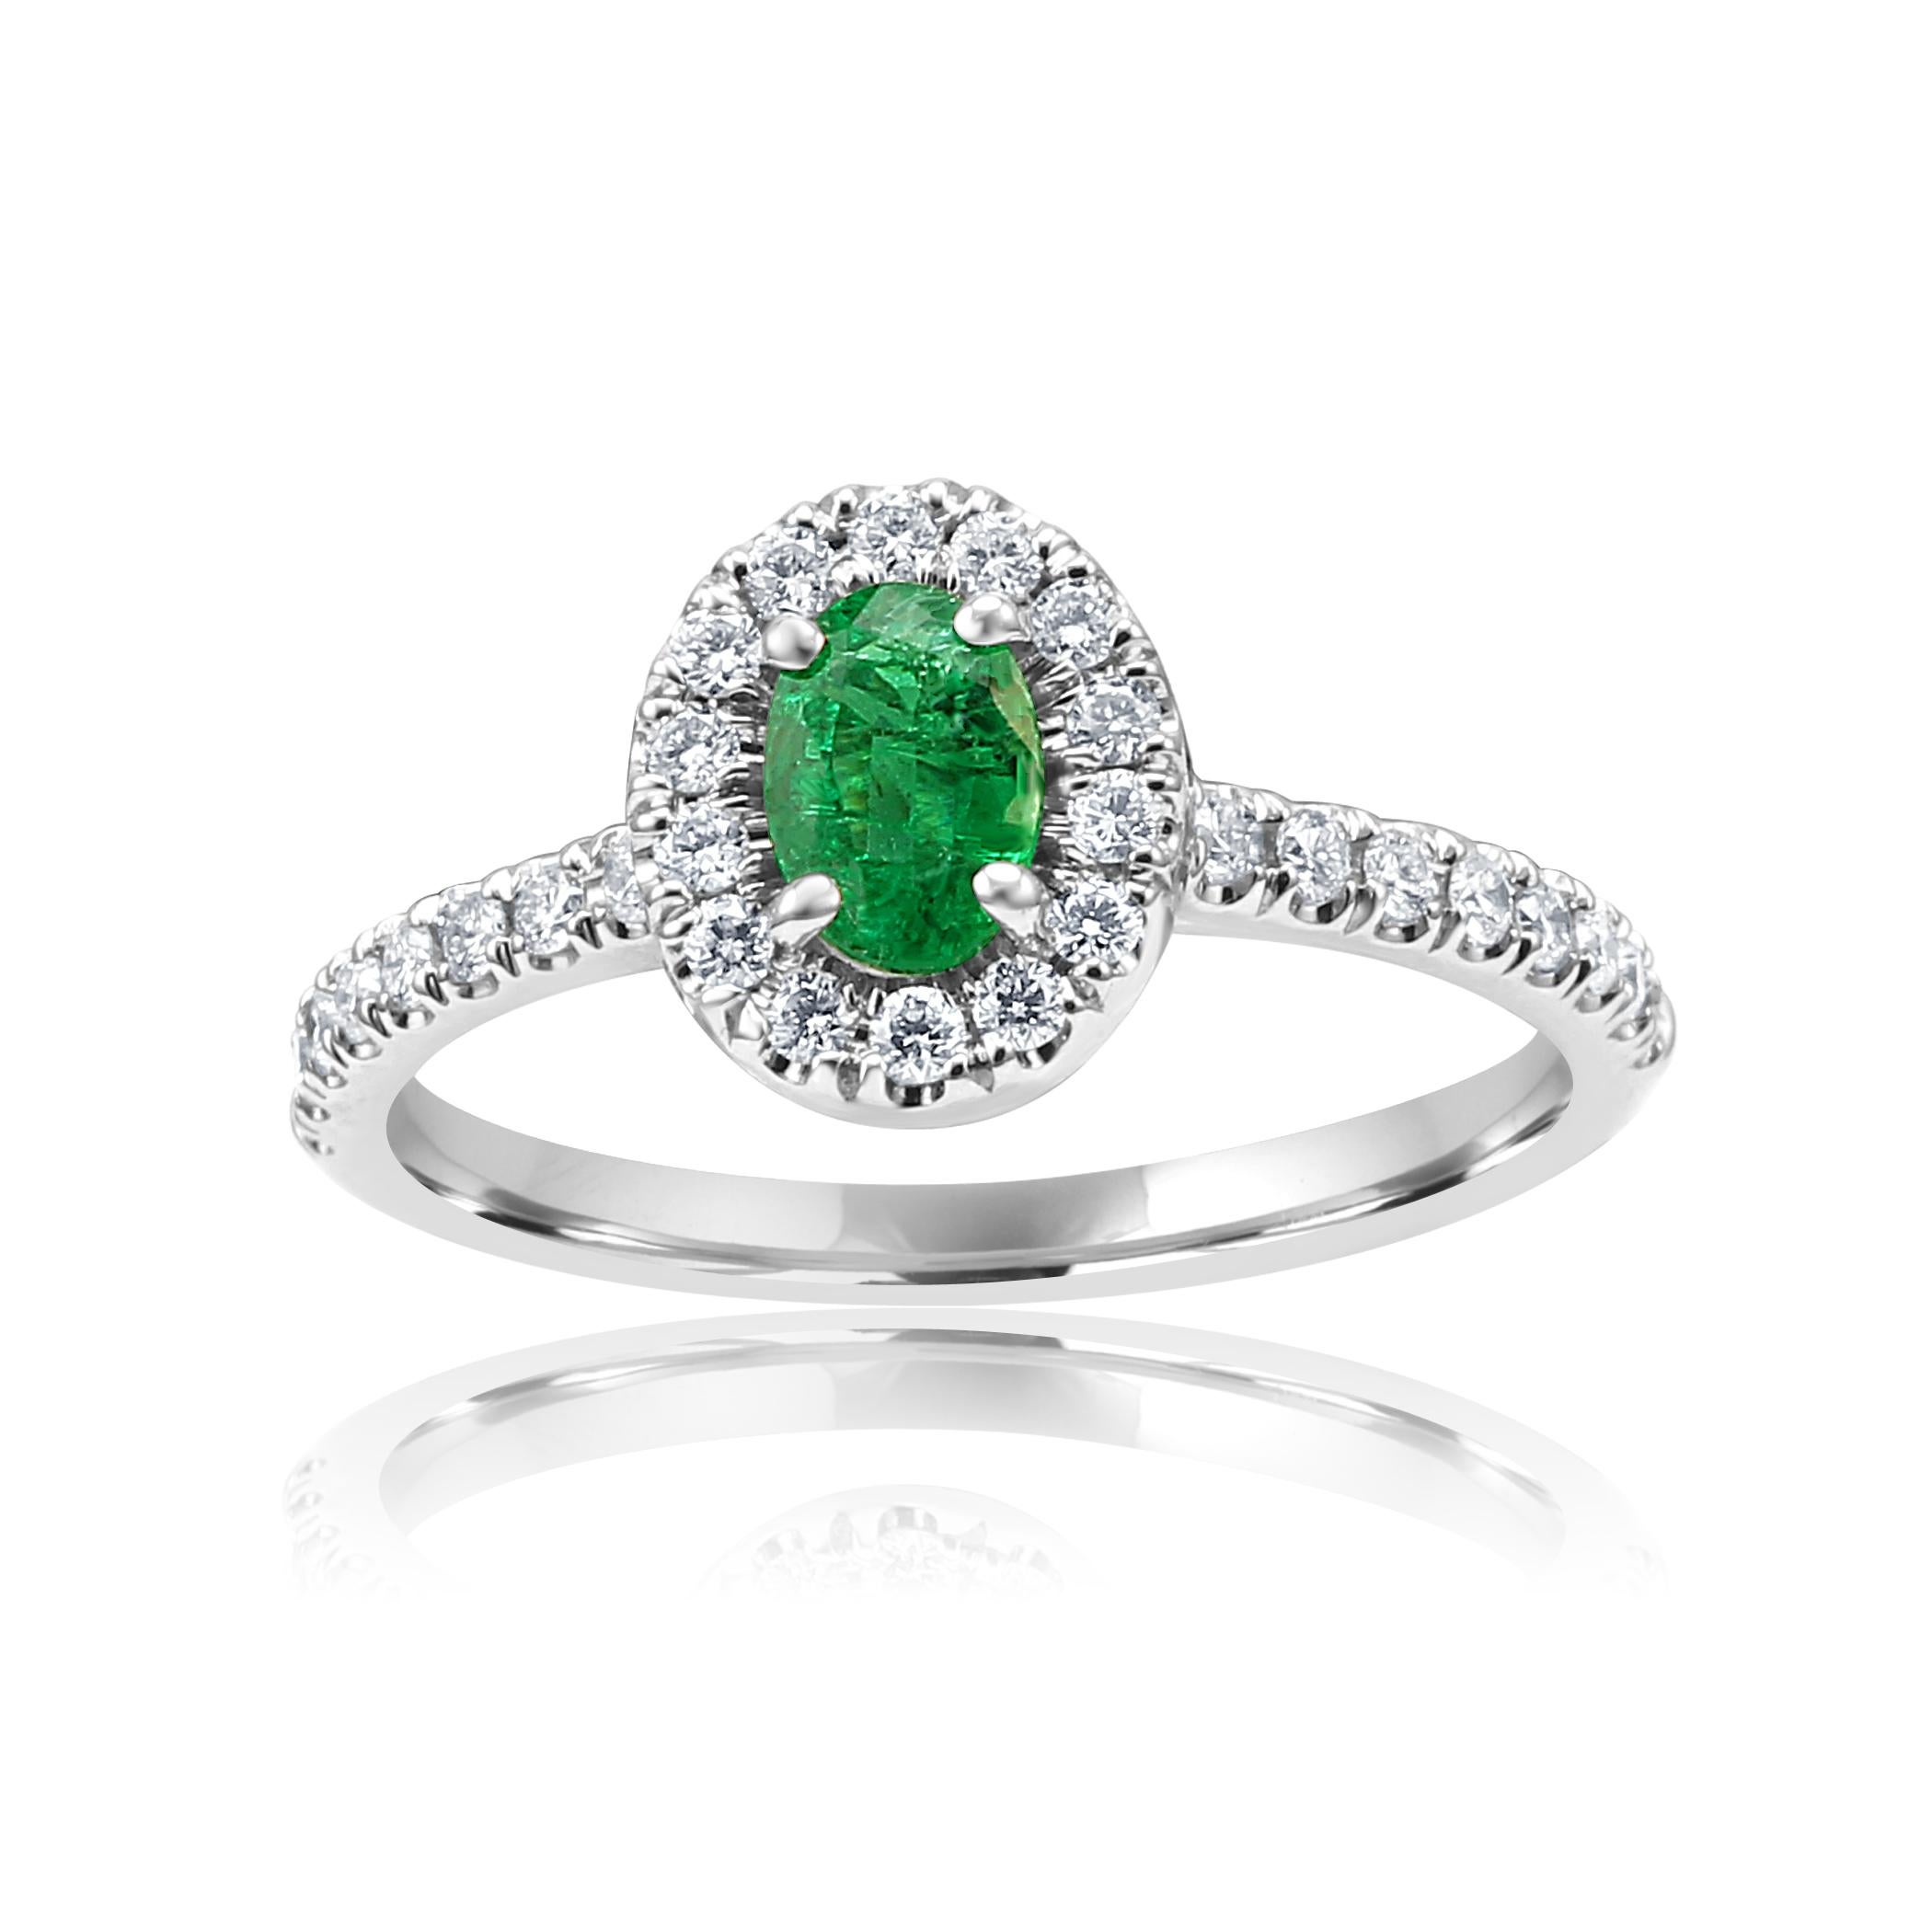 Emerald Oval 0.50 Carat Encircled in Single Halo of Colorless Round Brilliant VS-SI Diamonds 0.35 Carat Set in 14K White Gold Bridal Fashion cocktail Ring.

Style available in different price ranges. Prices are based on your selection of 4C's Cut,